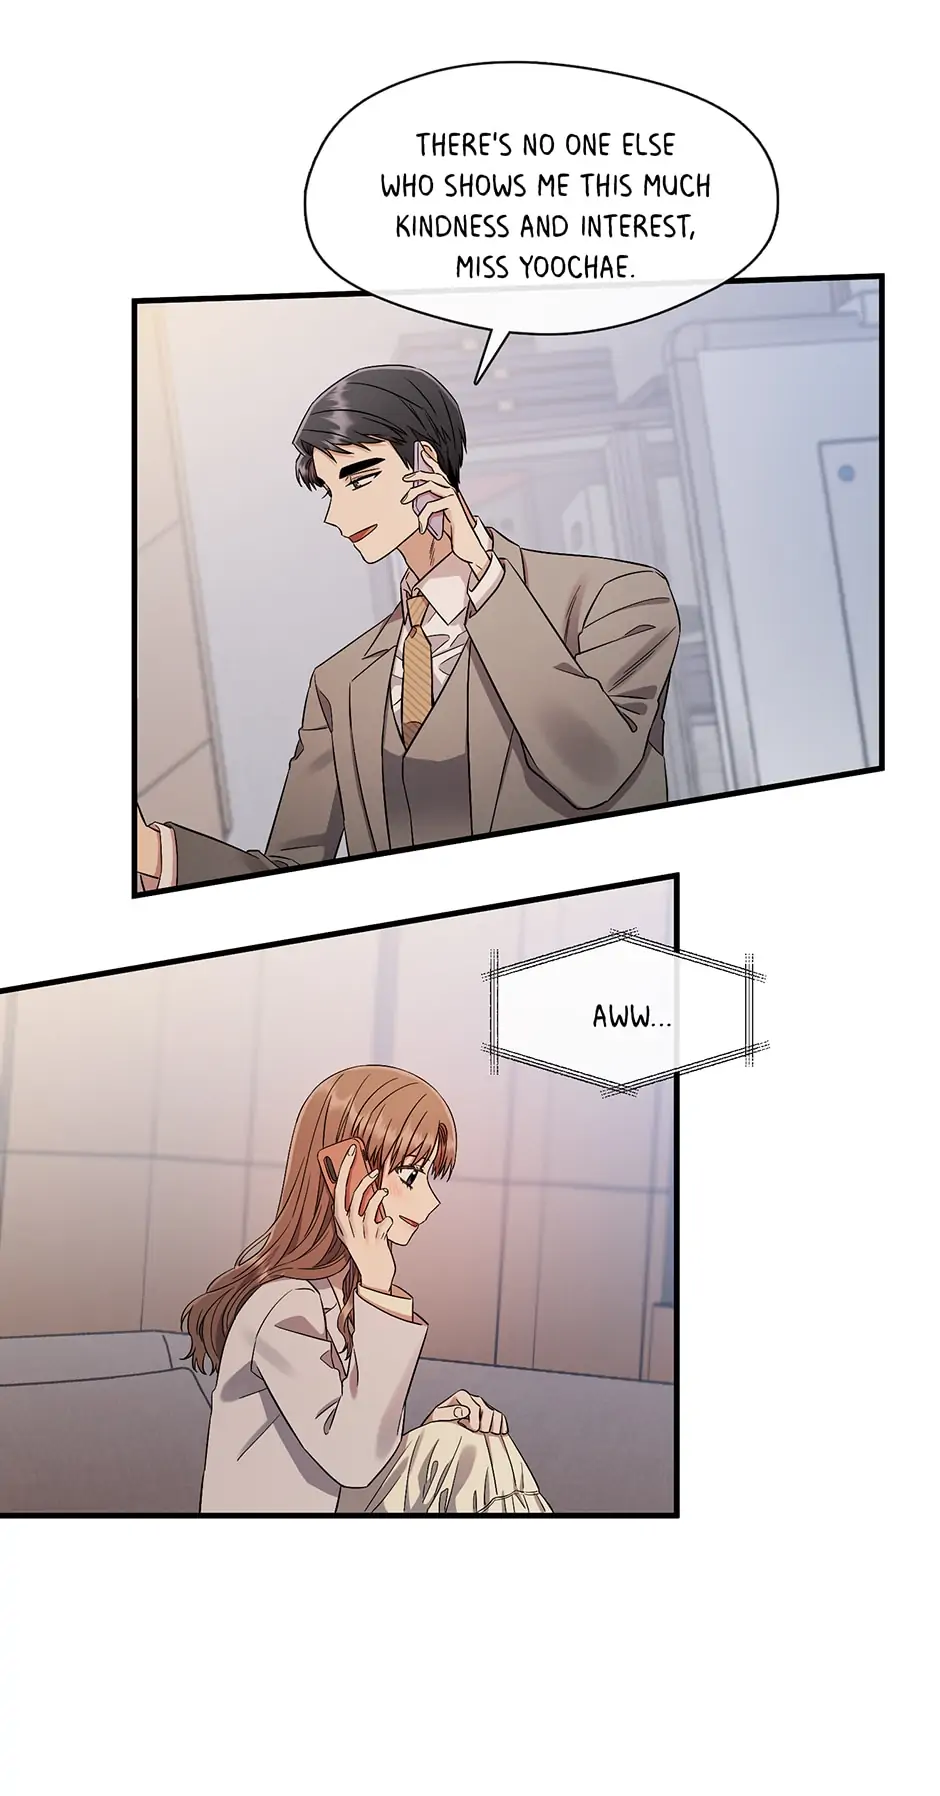 Office Romance Confidential chapter 69